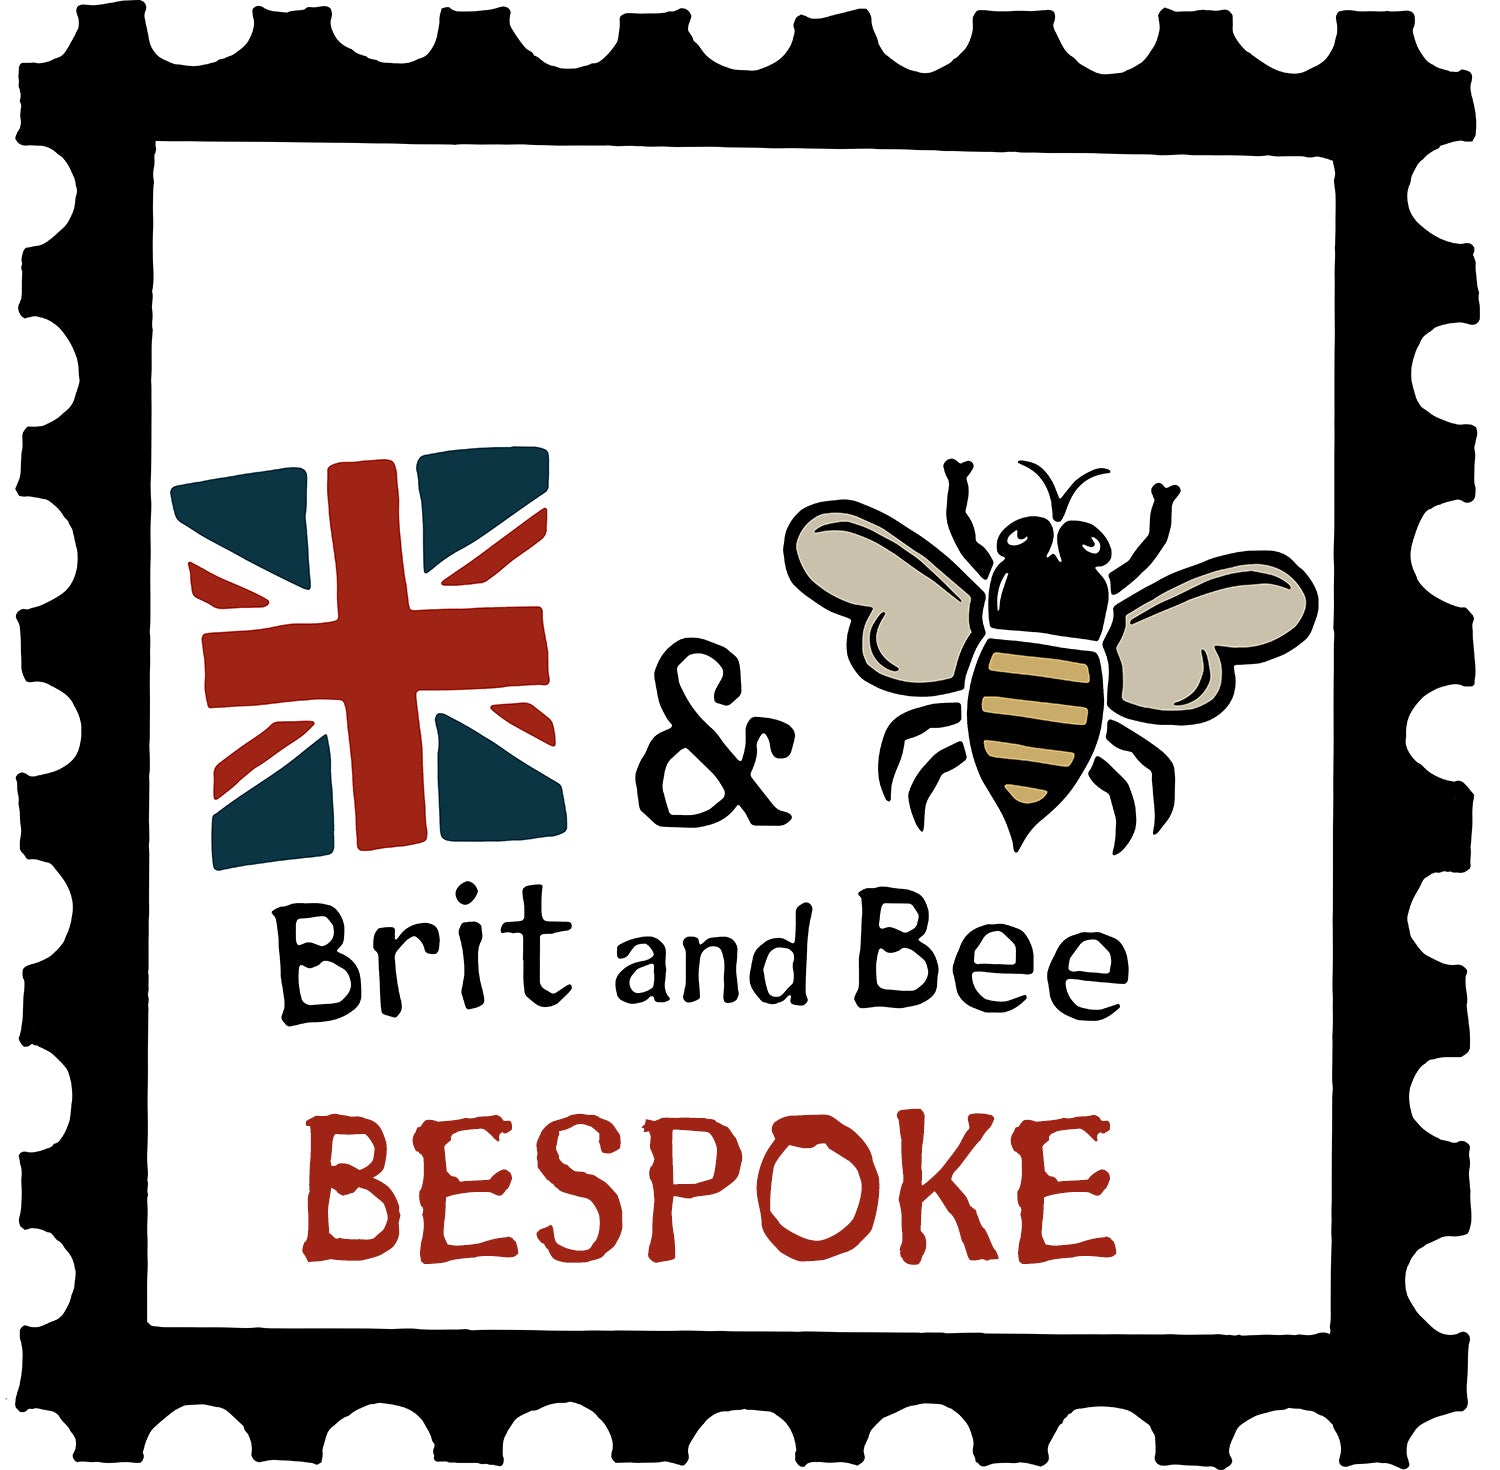 Brit and Bee Bespoke